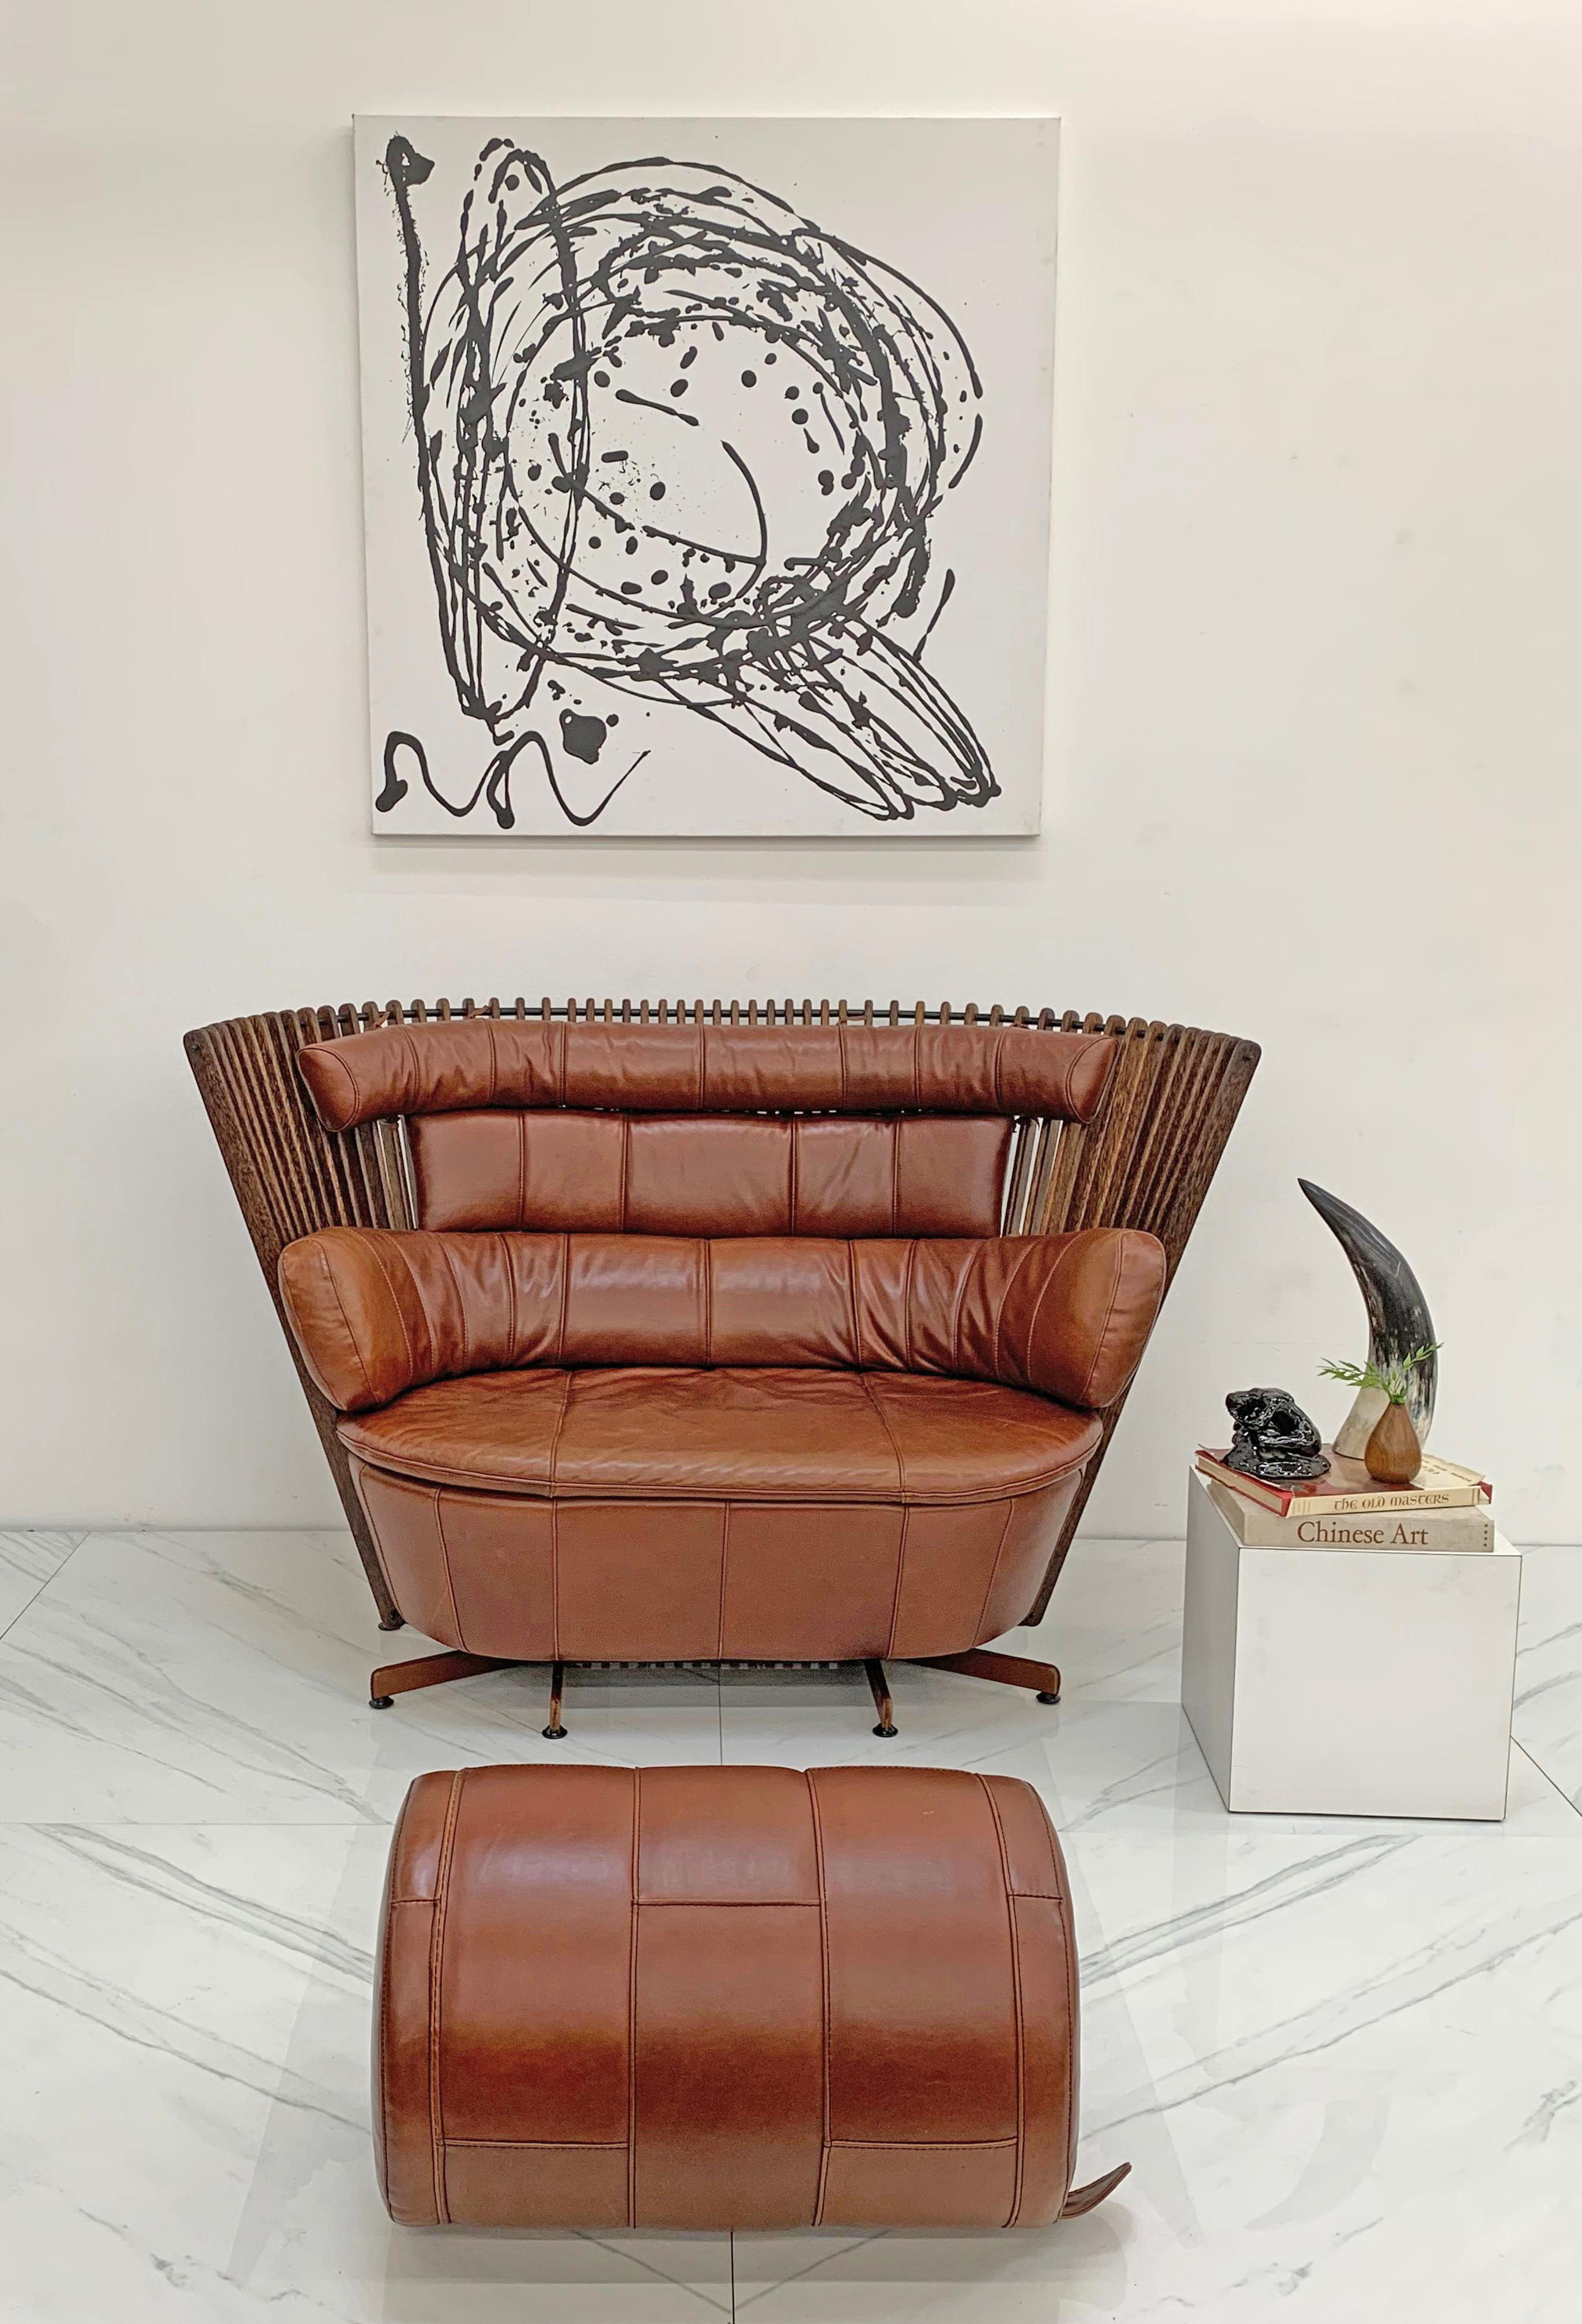 This sofa / settee is absolutely stunning. This 2 seater sofa consists of a gorgeous patinated cognac leather with polished palmwood fan-back frame. The attention to detail is just incredible-- even the bottom base of the sofa is completely clad in